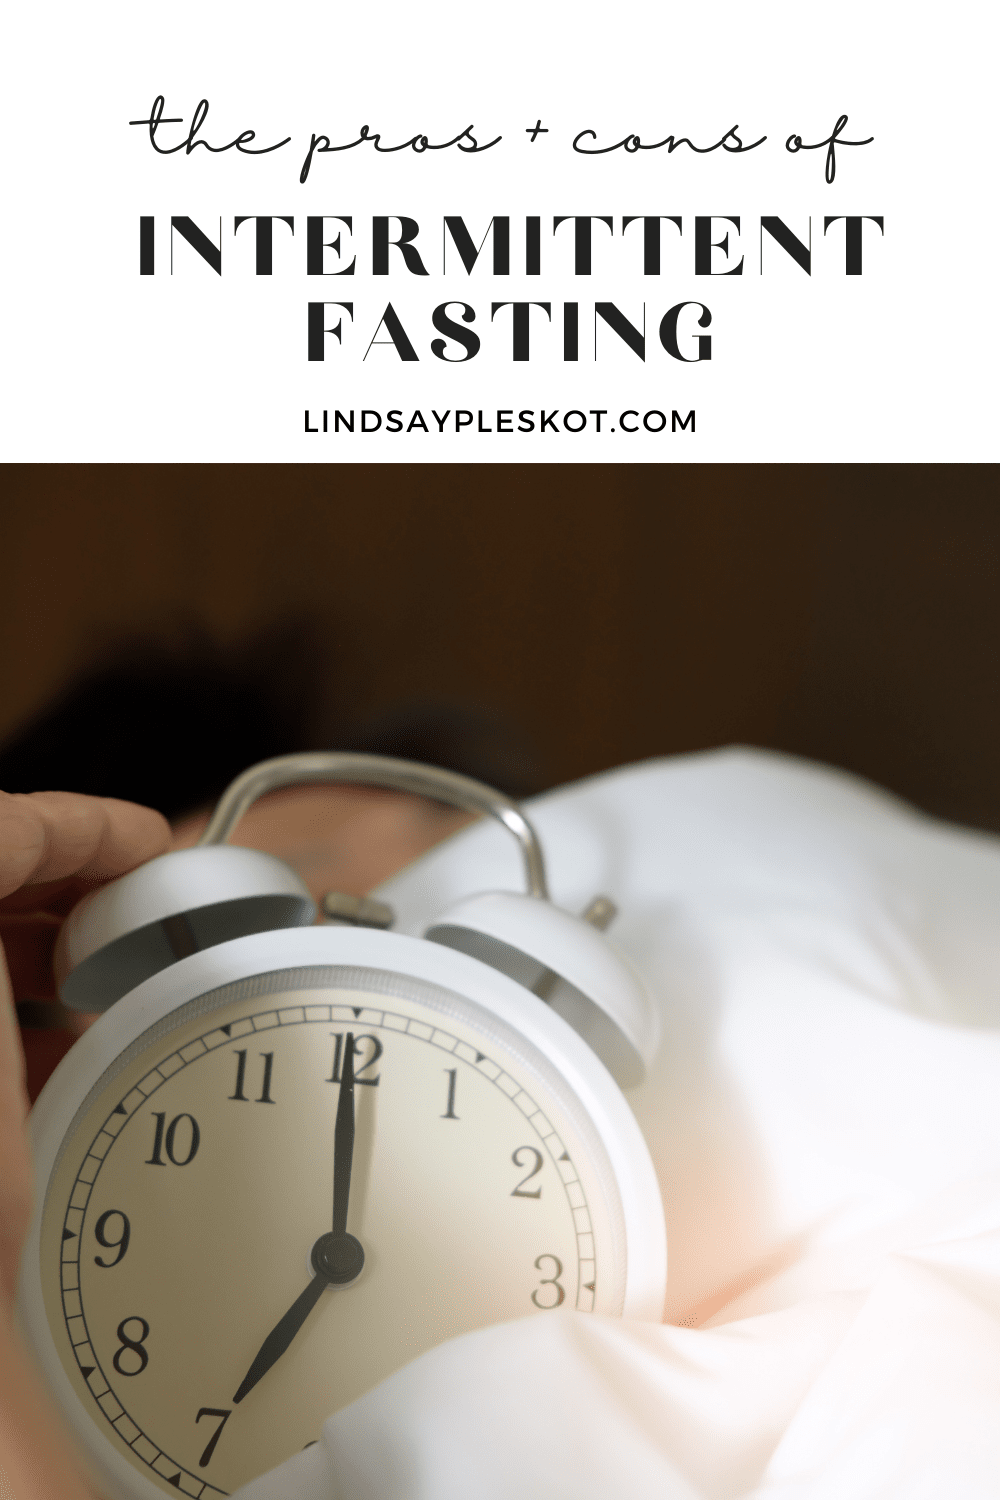 Top 1/3 of the page has a white background with black text that reads "the pros and cons of intermittente fasting lindsaypleskot.com. Belowx is a picture of white alarm clock on top of a blanket.